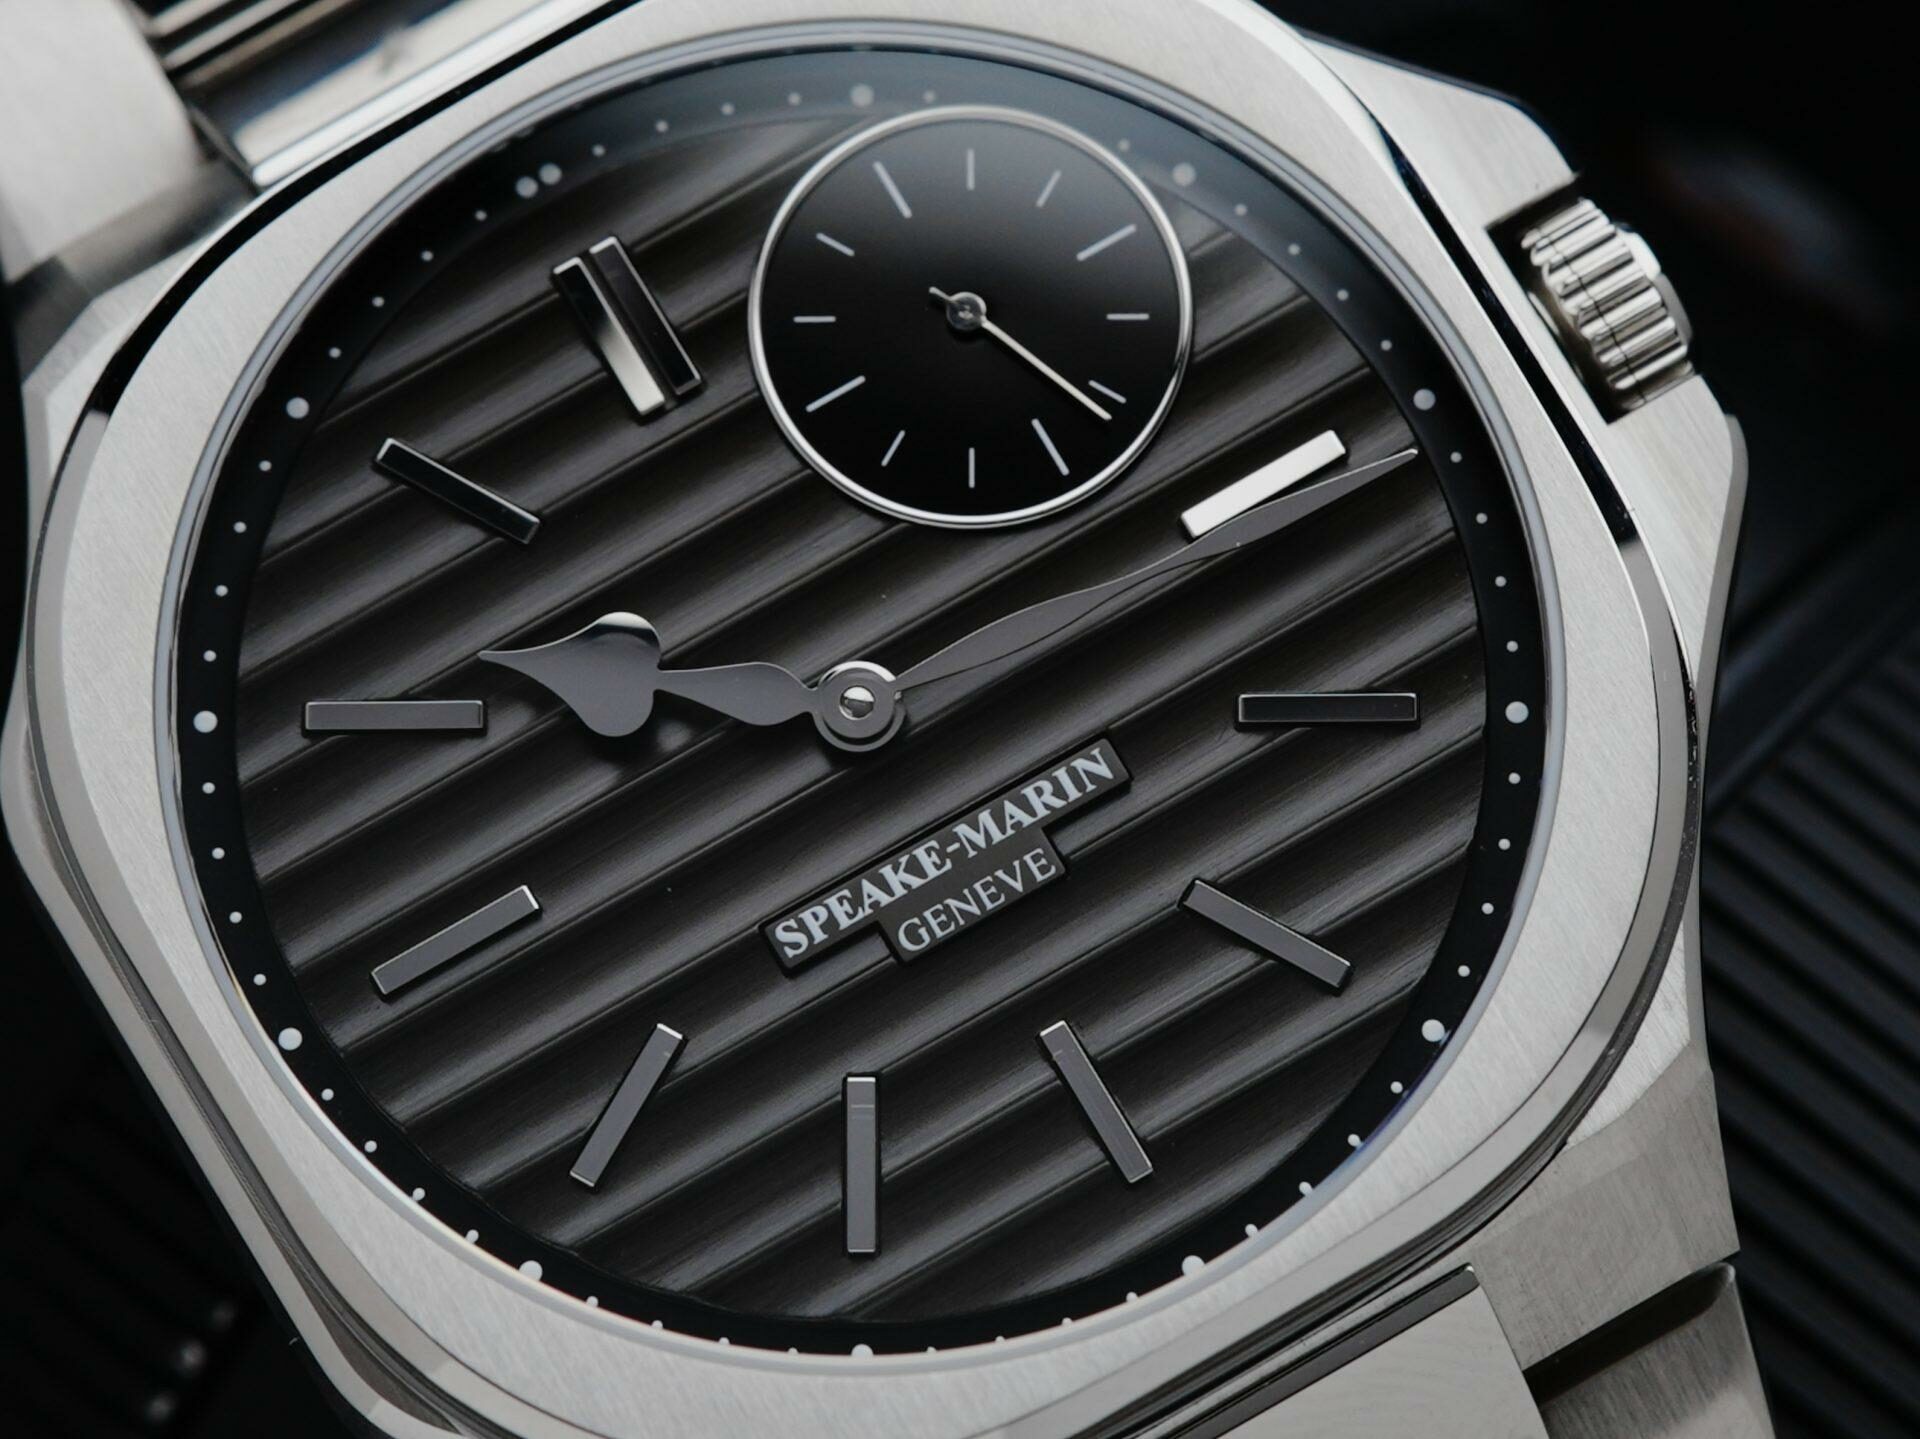 CLose up picture of the Speake-Marin Ripples Sport LA City watch.